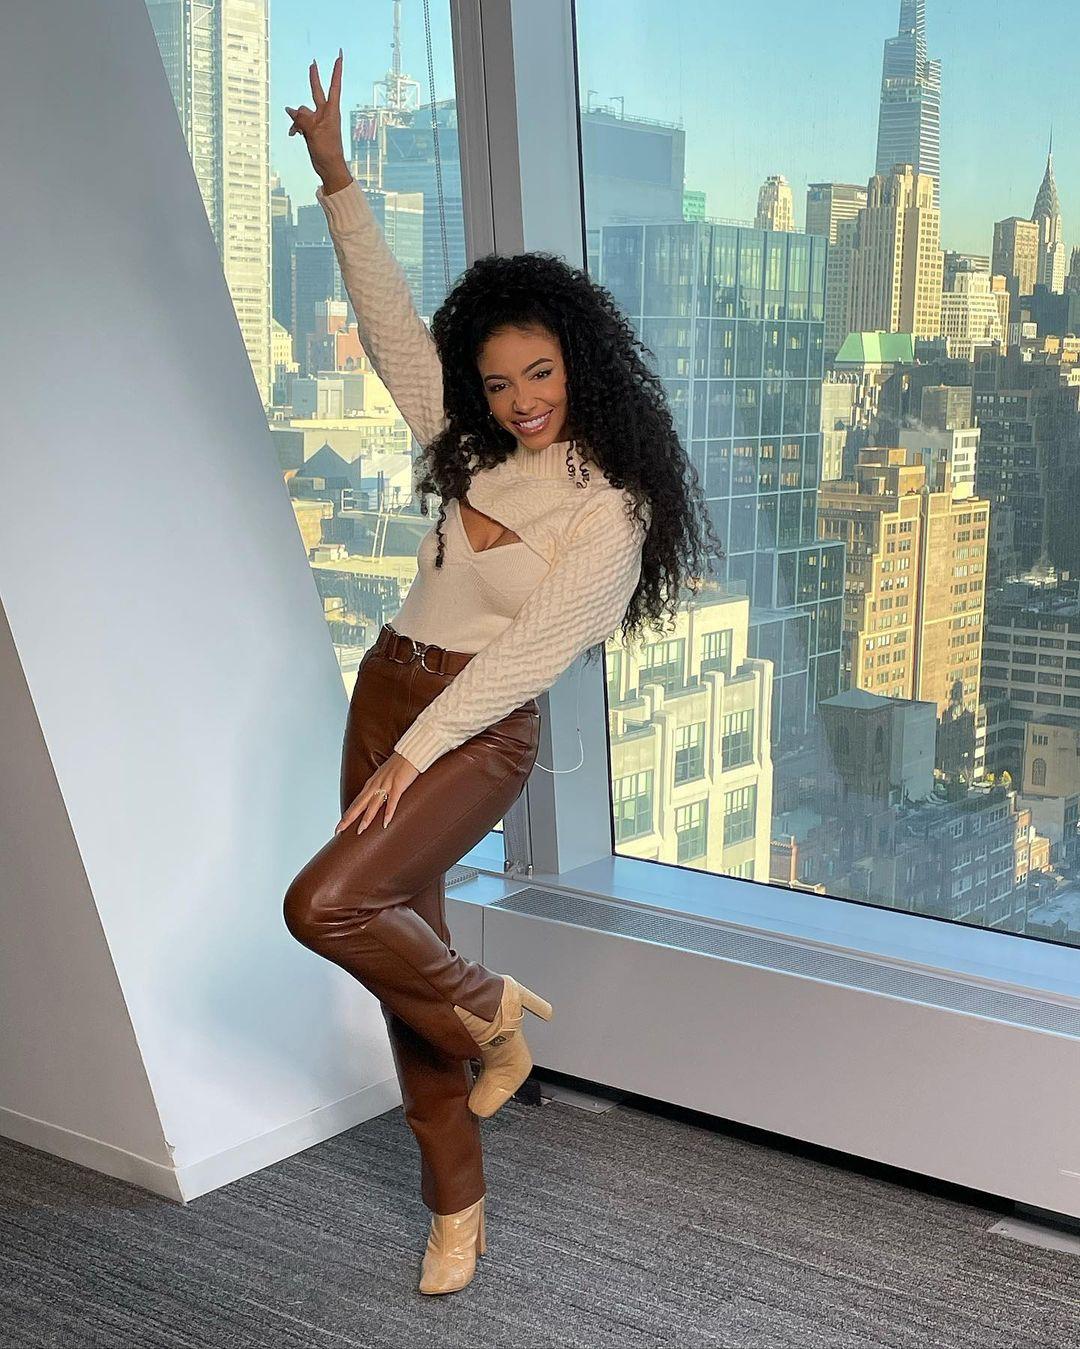 Former Miss USA Cheslie Kryst jumped to her death